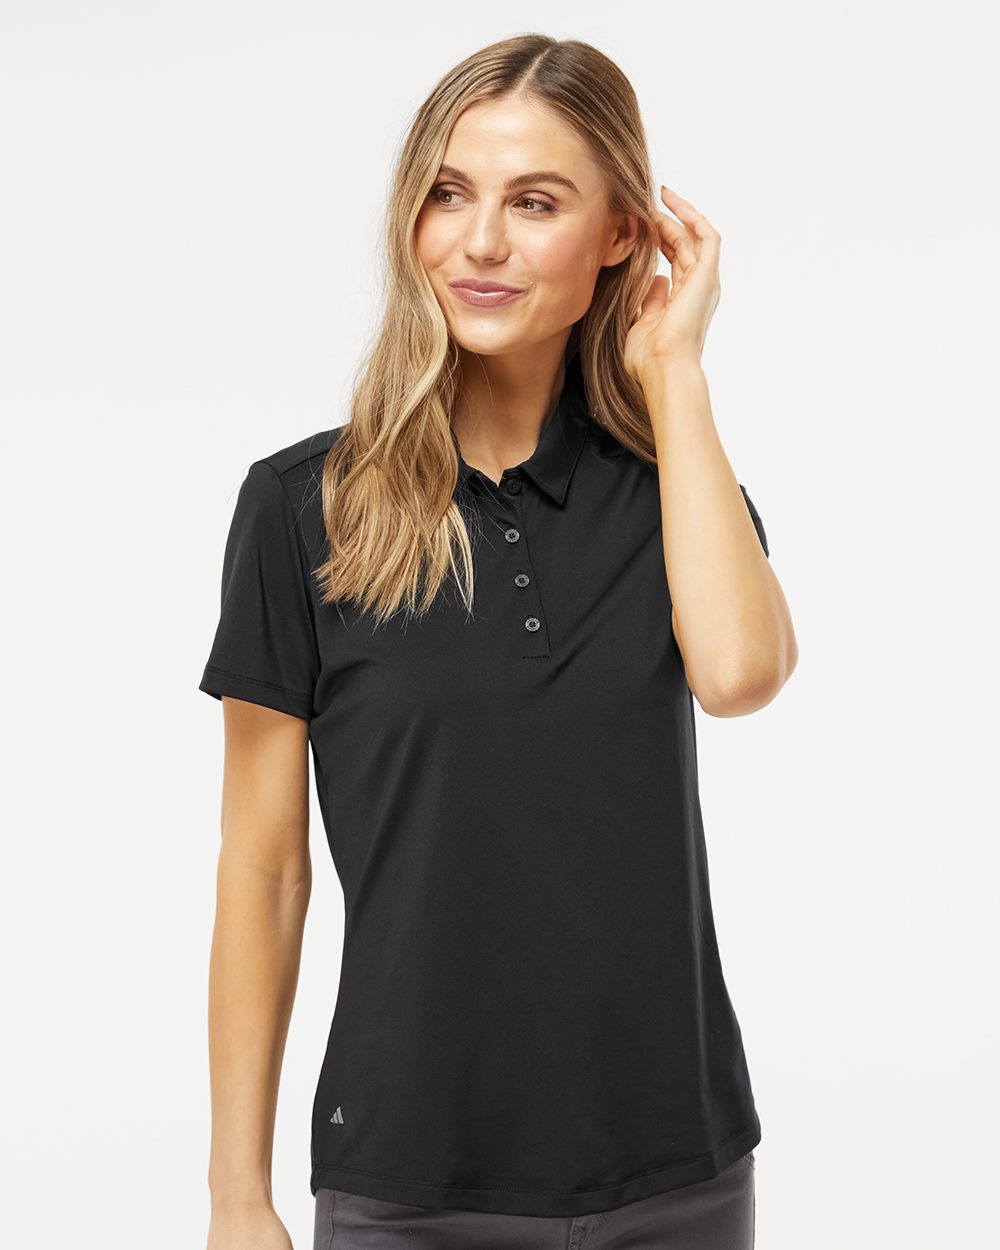 Adidas A515 - Women's Ultimate Solid Polo